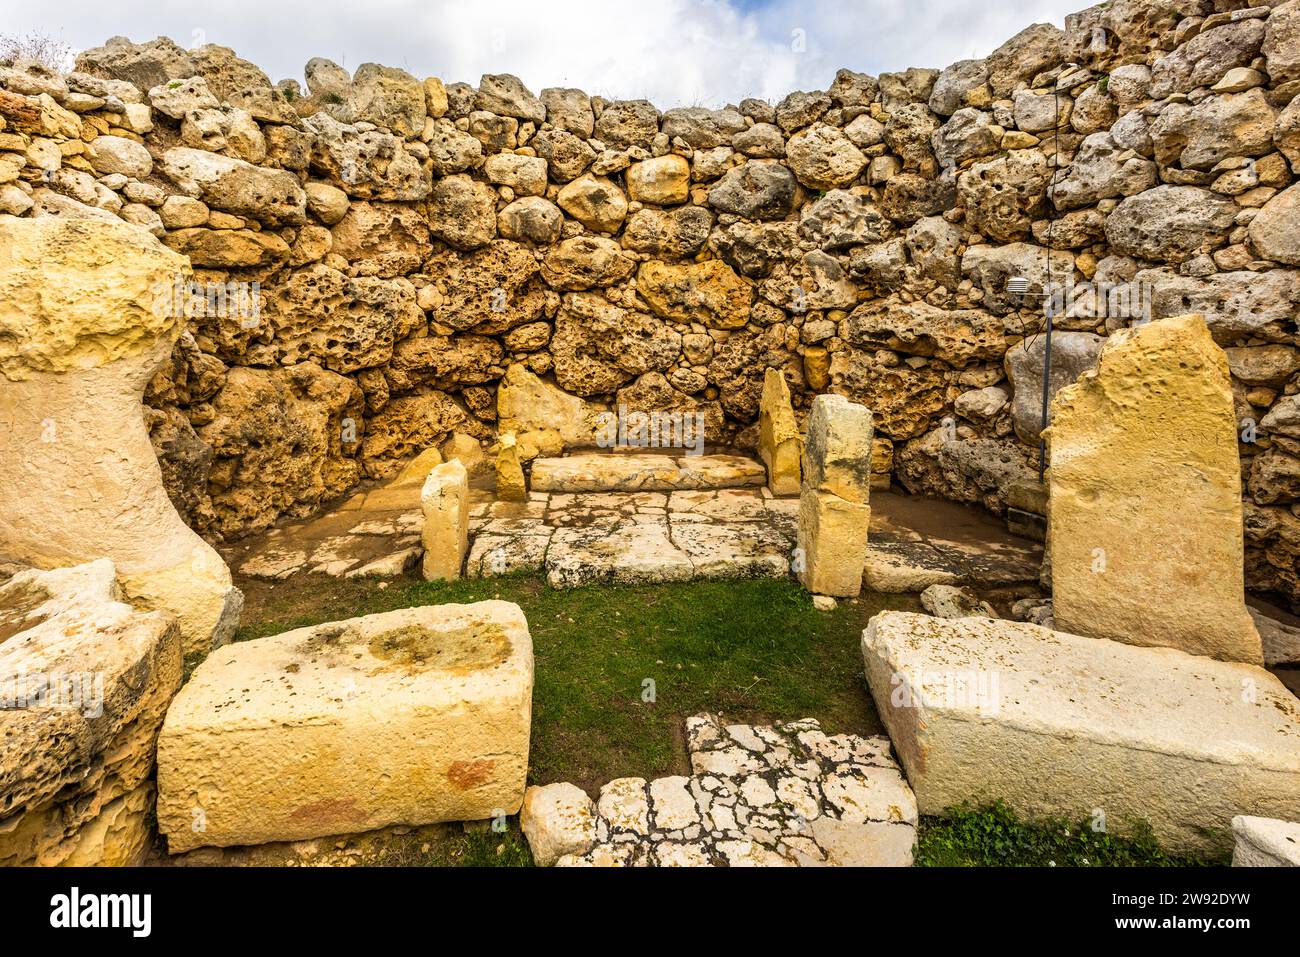 The remains of an altar can still be seen in an apse of the southern Ġgantija temple. Soft limestone, which was easier to work with the stone tools available at the time, was used inside the temples. The temple is part of the UNESCO World Heritage Megalithic Temples of Malta and is one of the oldest half-preserved freestanding buildings in the world. Xaghra, Malta Stock Photo